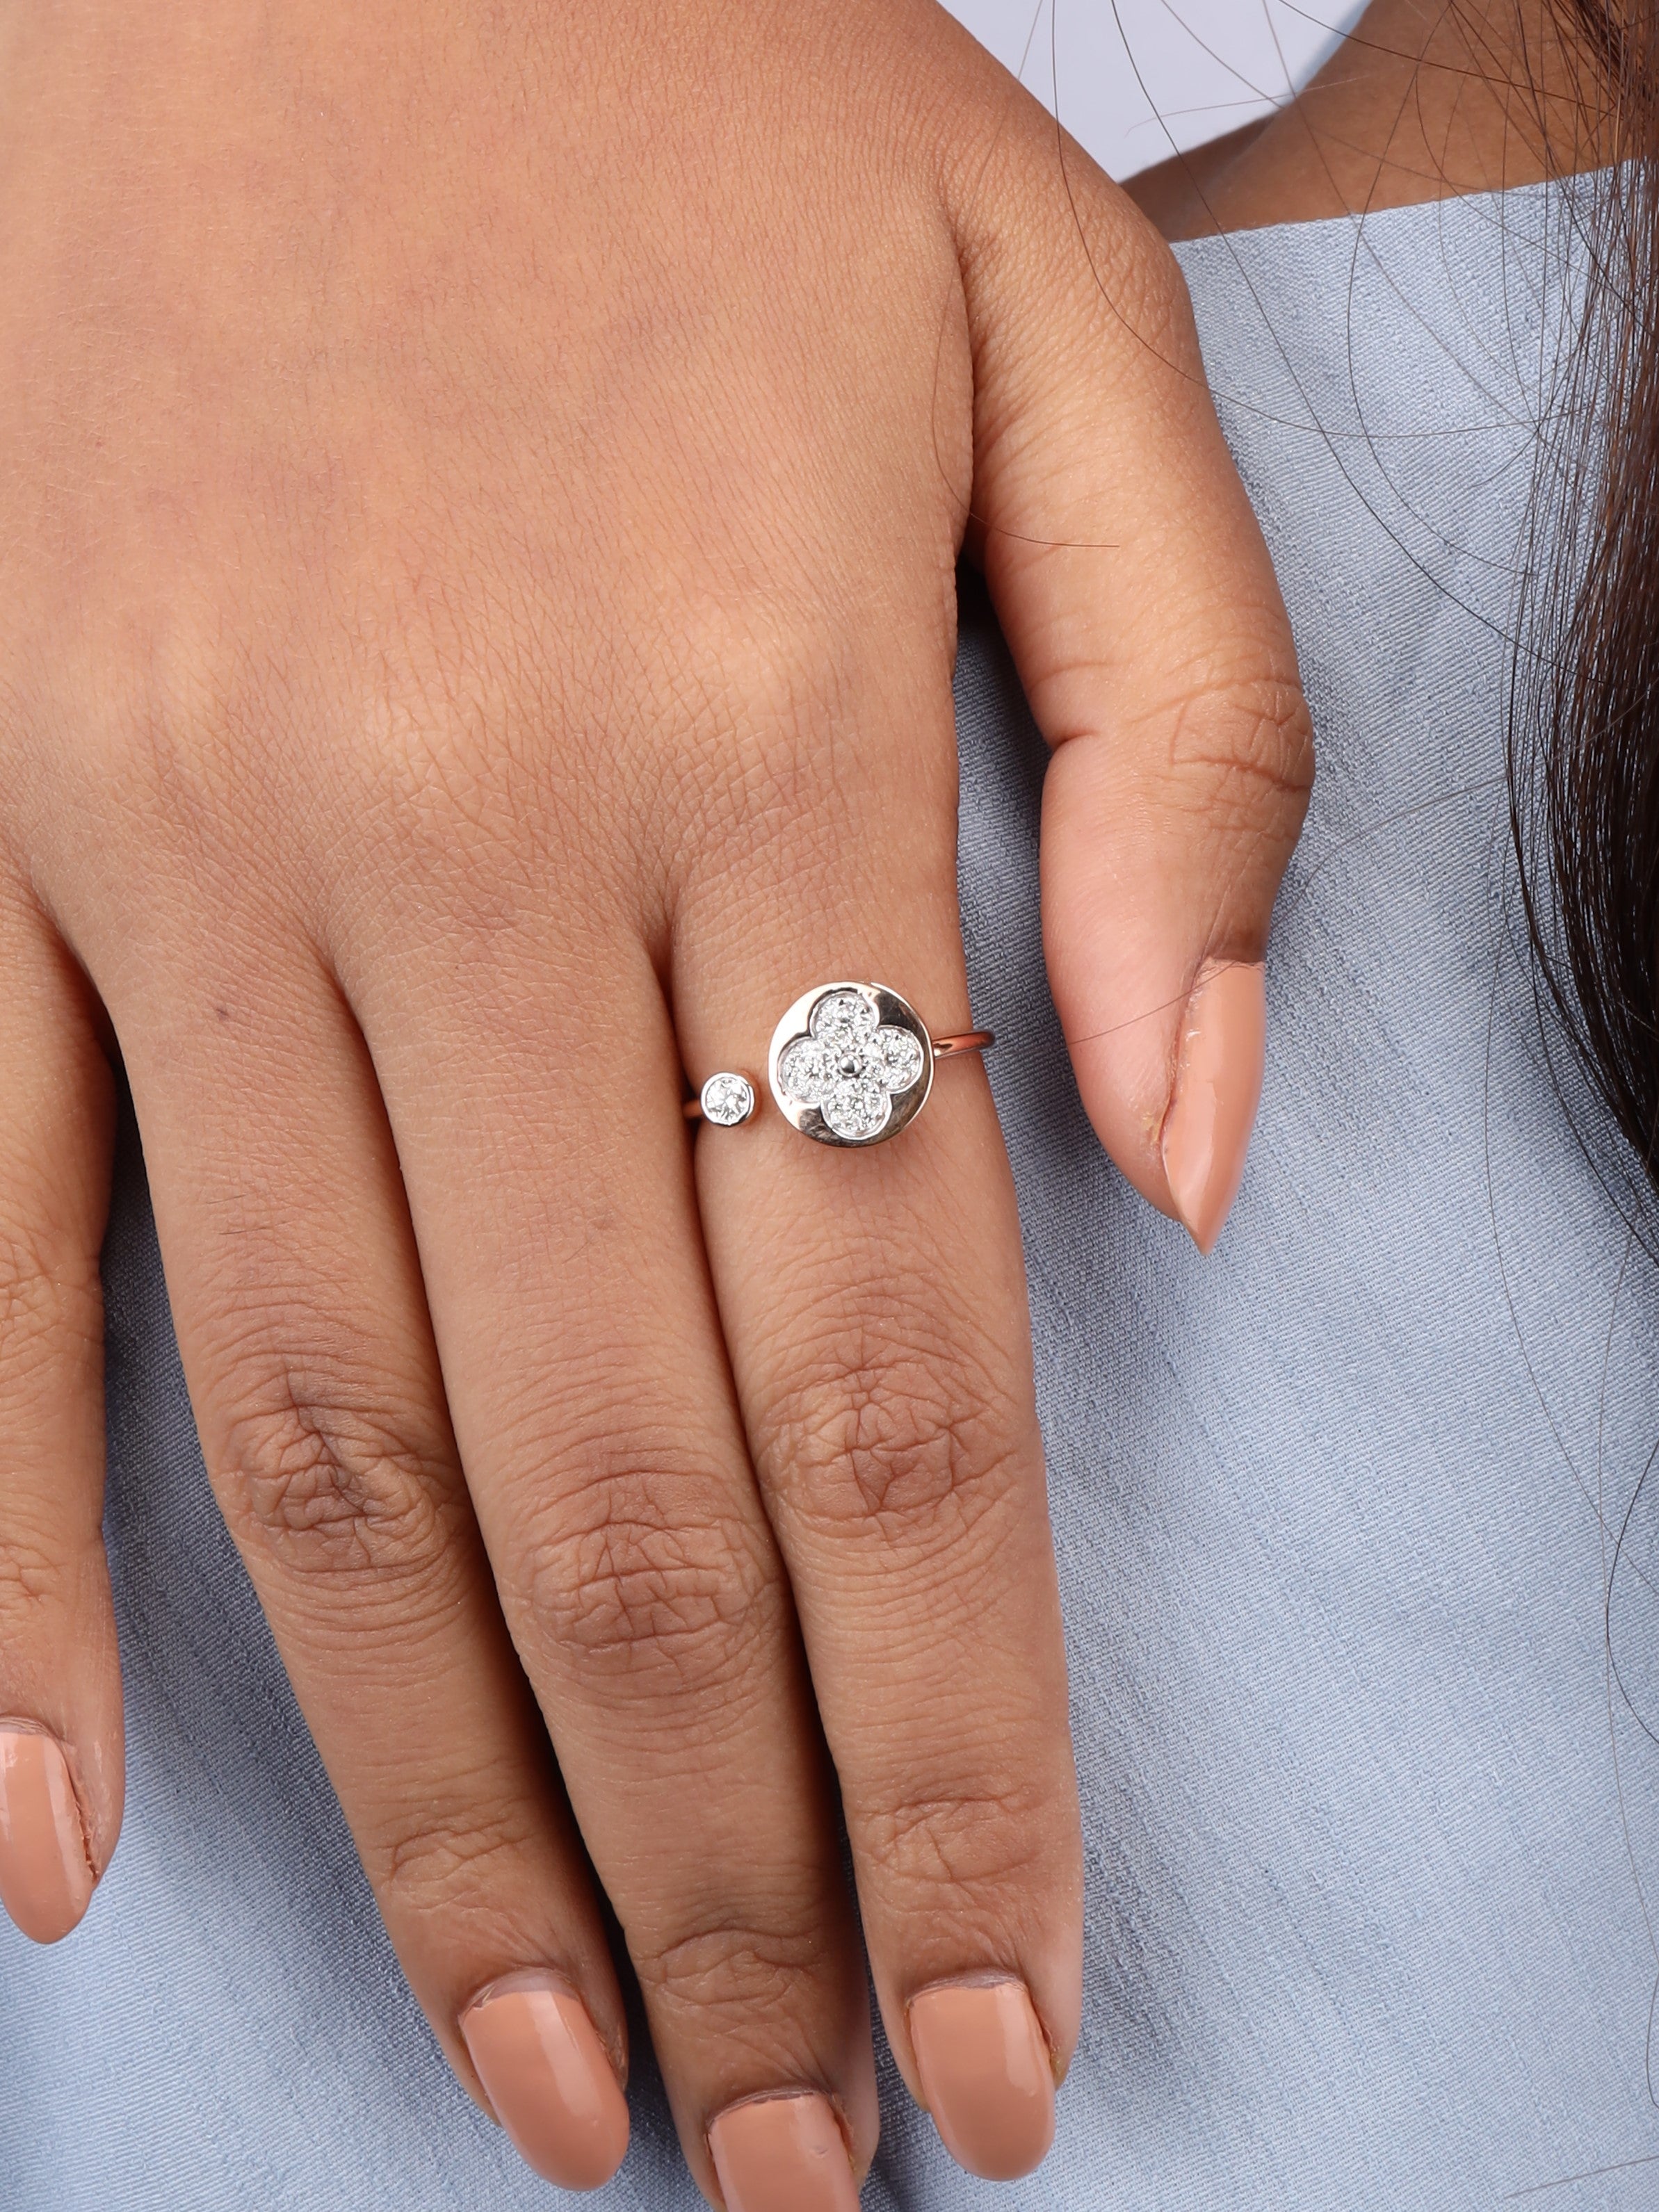 These $30,000-$40,000 Wedding and Engagement Rings Are so Worth It!